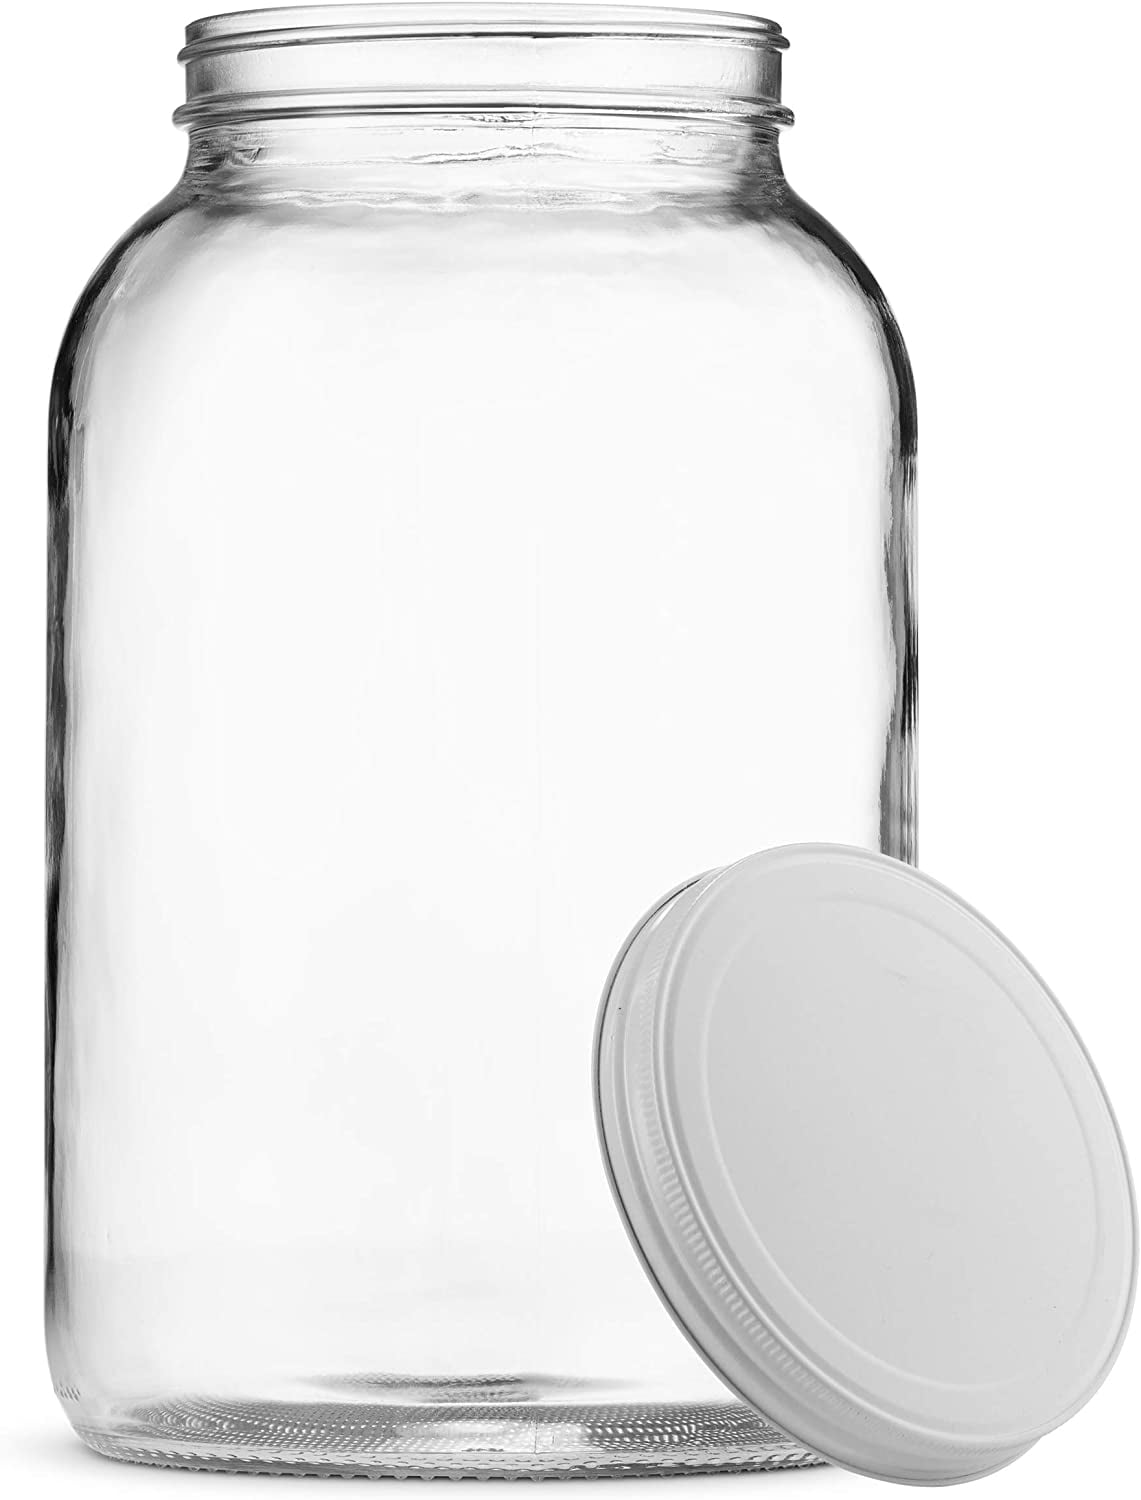 Folinstall Super Wide Mouth Glass Storage Jar with Airtight Lids, 1 Gallon  Large Mason Jars with 2 Measurement Marks, Large Capacity for Pickle Jar